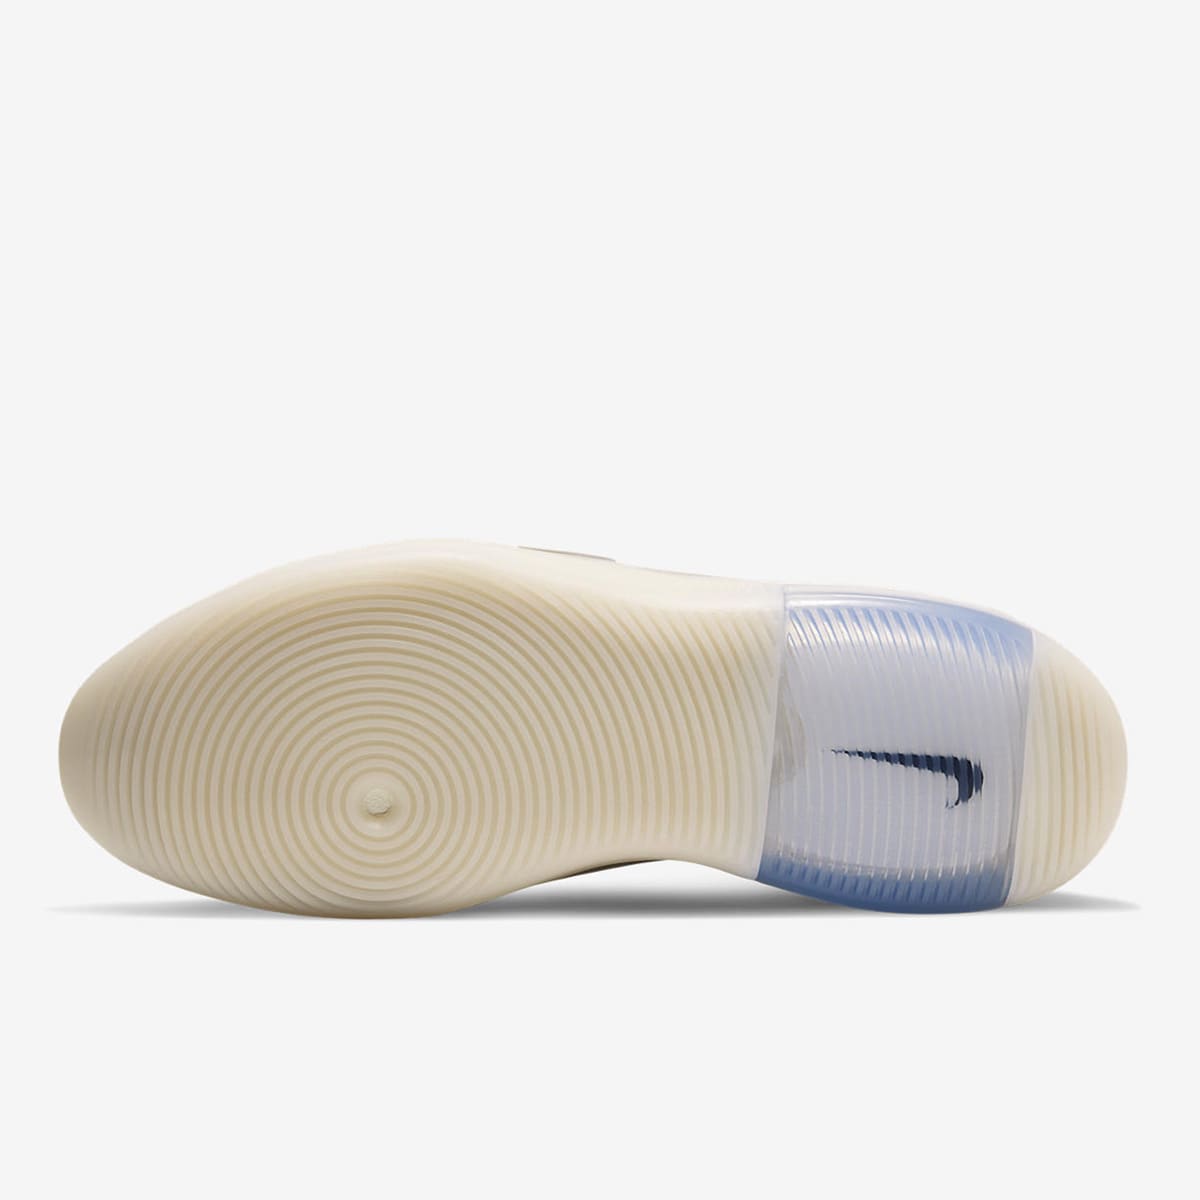 Nike Air Fear of God 1 (String, Oatmeal & Pale Ivory) | END. Launches